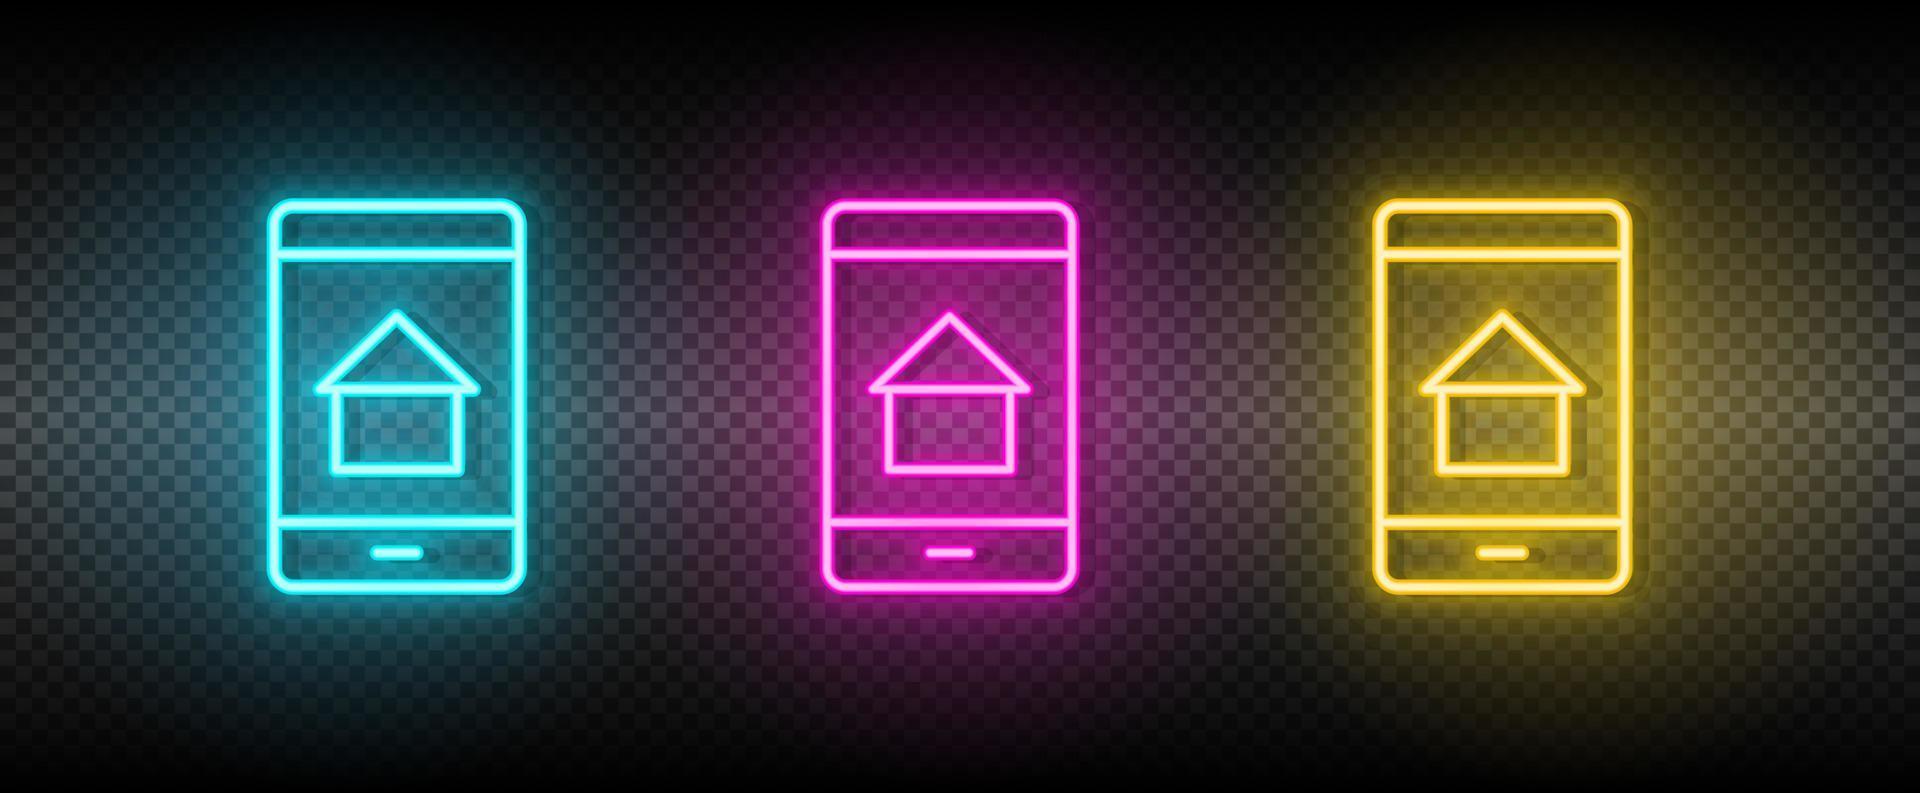 Real estate vector app, house, mobile. Illustration neon blue, yellow, red icon set